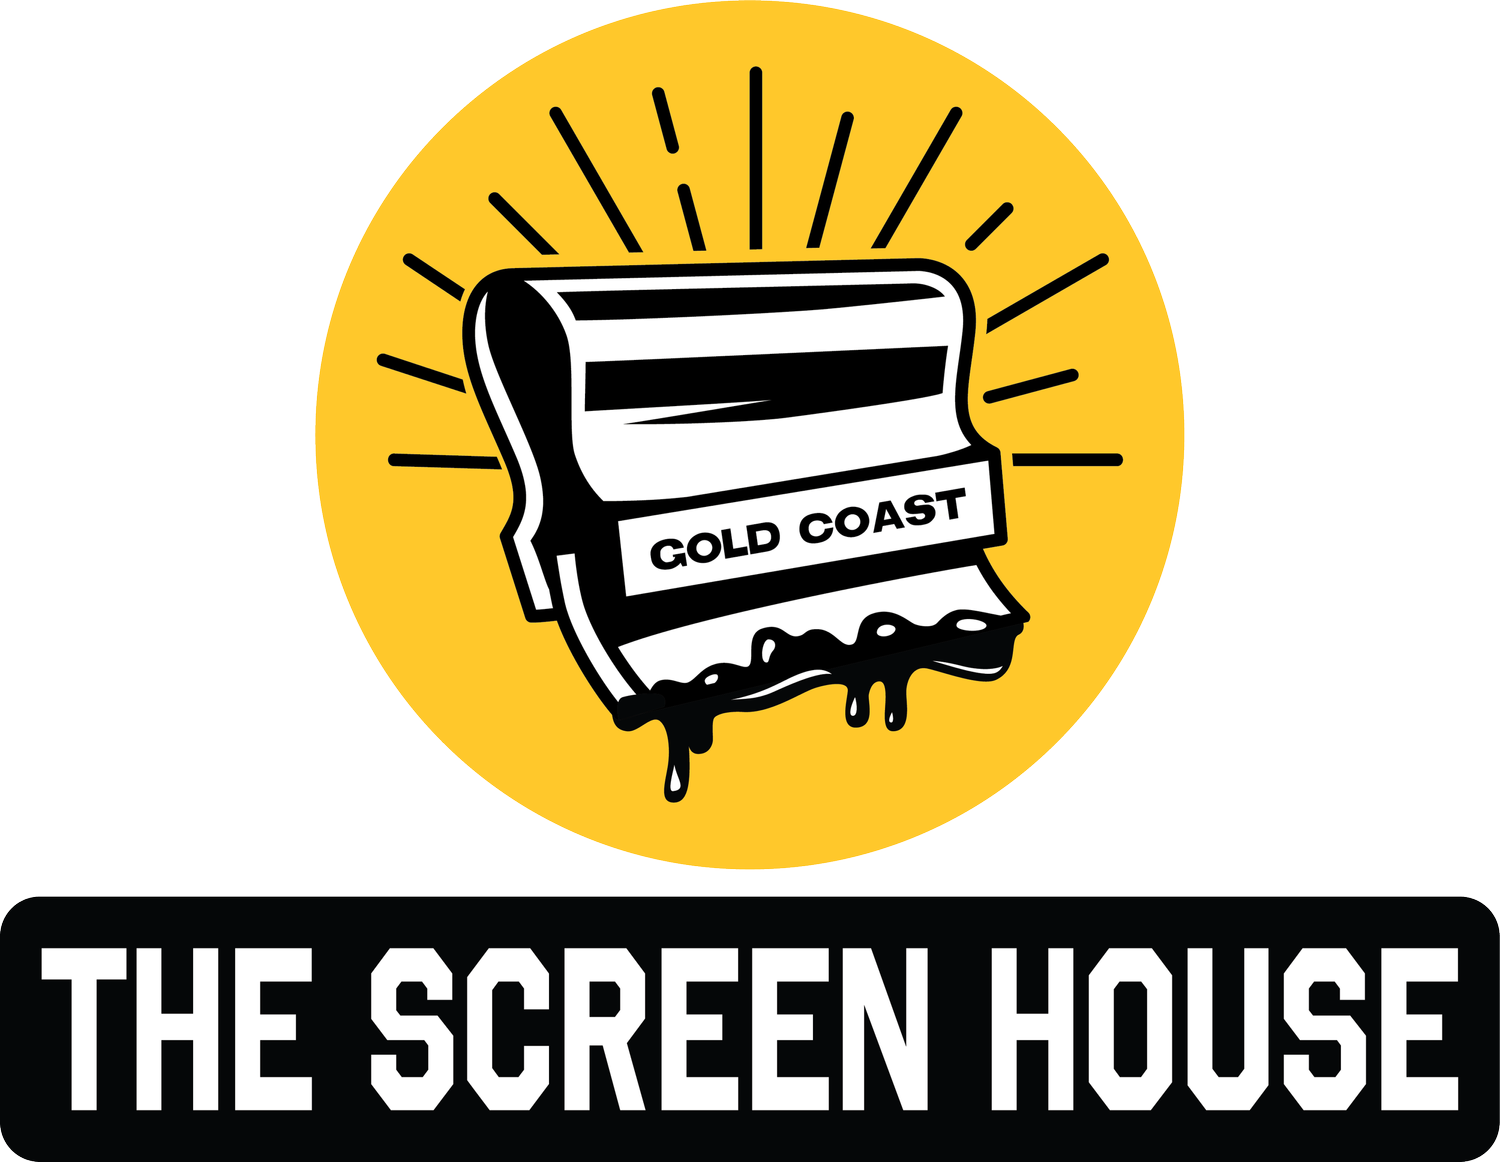 THE SCREEN HOUSE